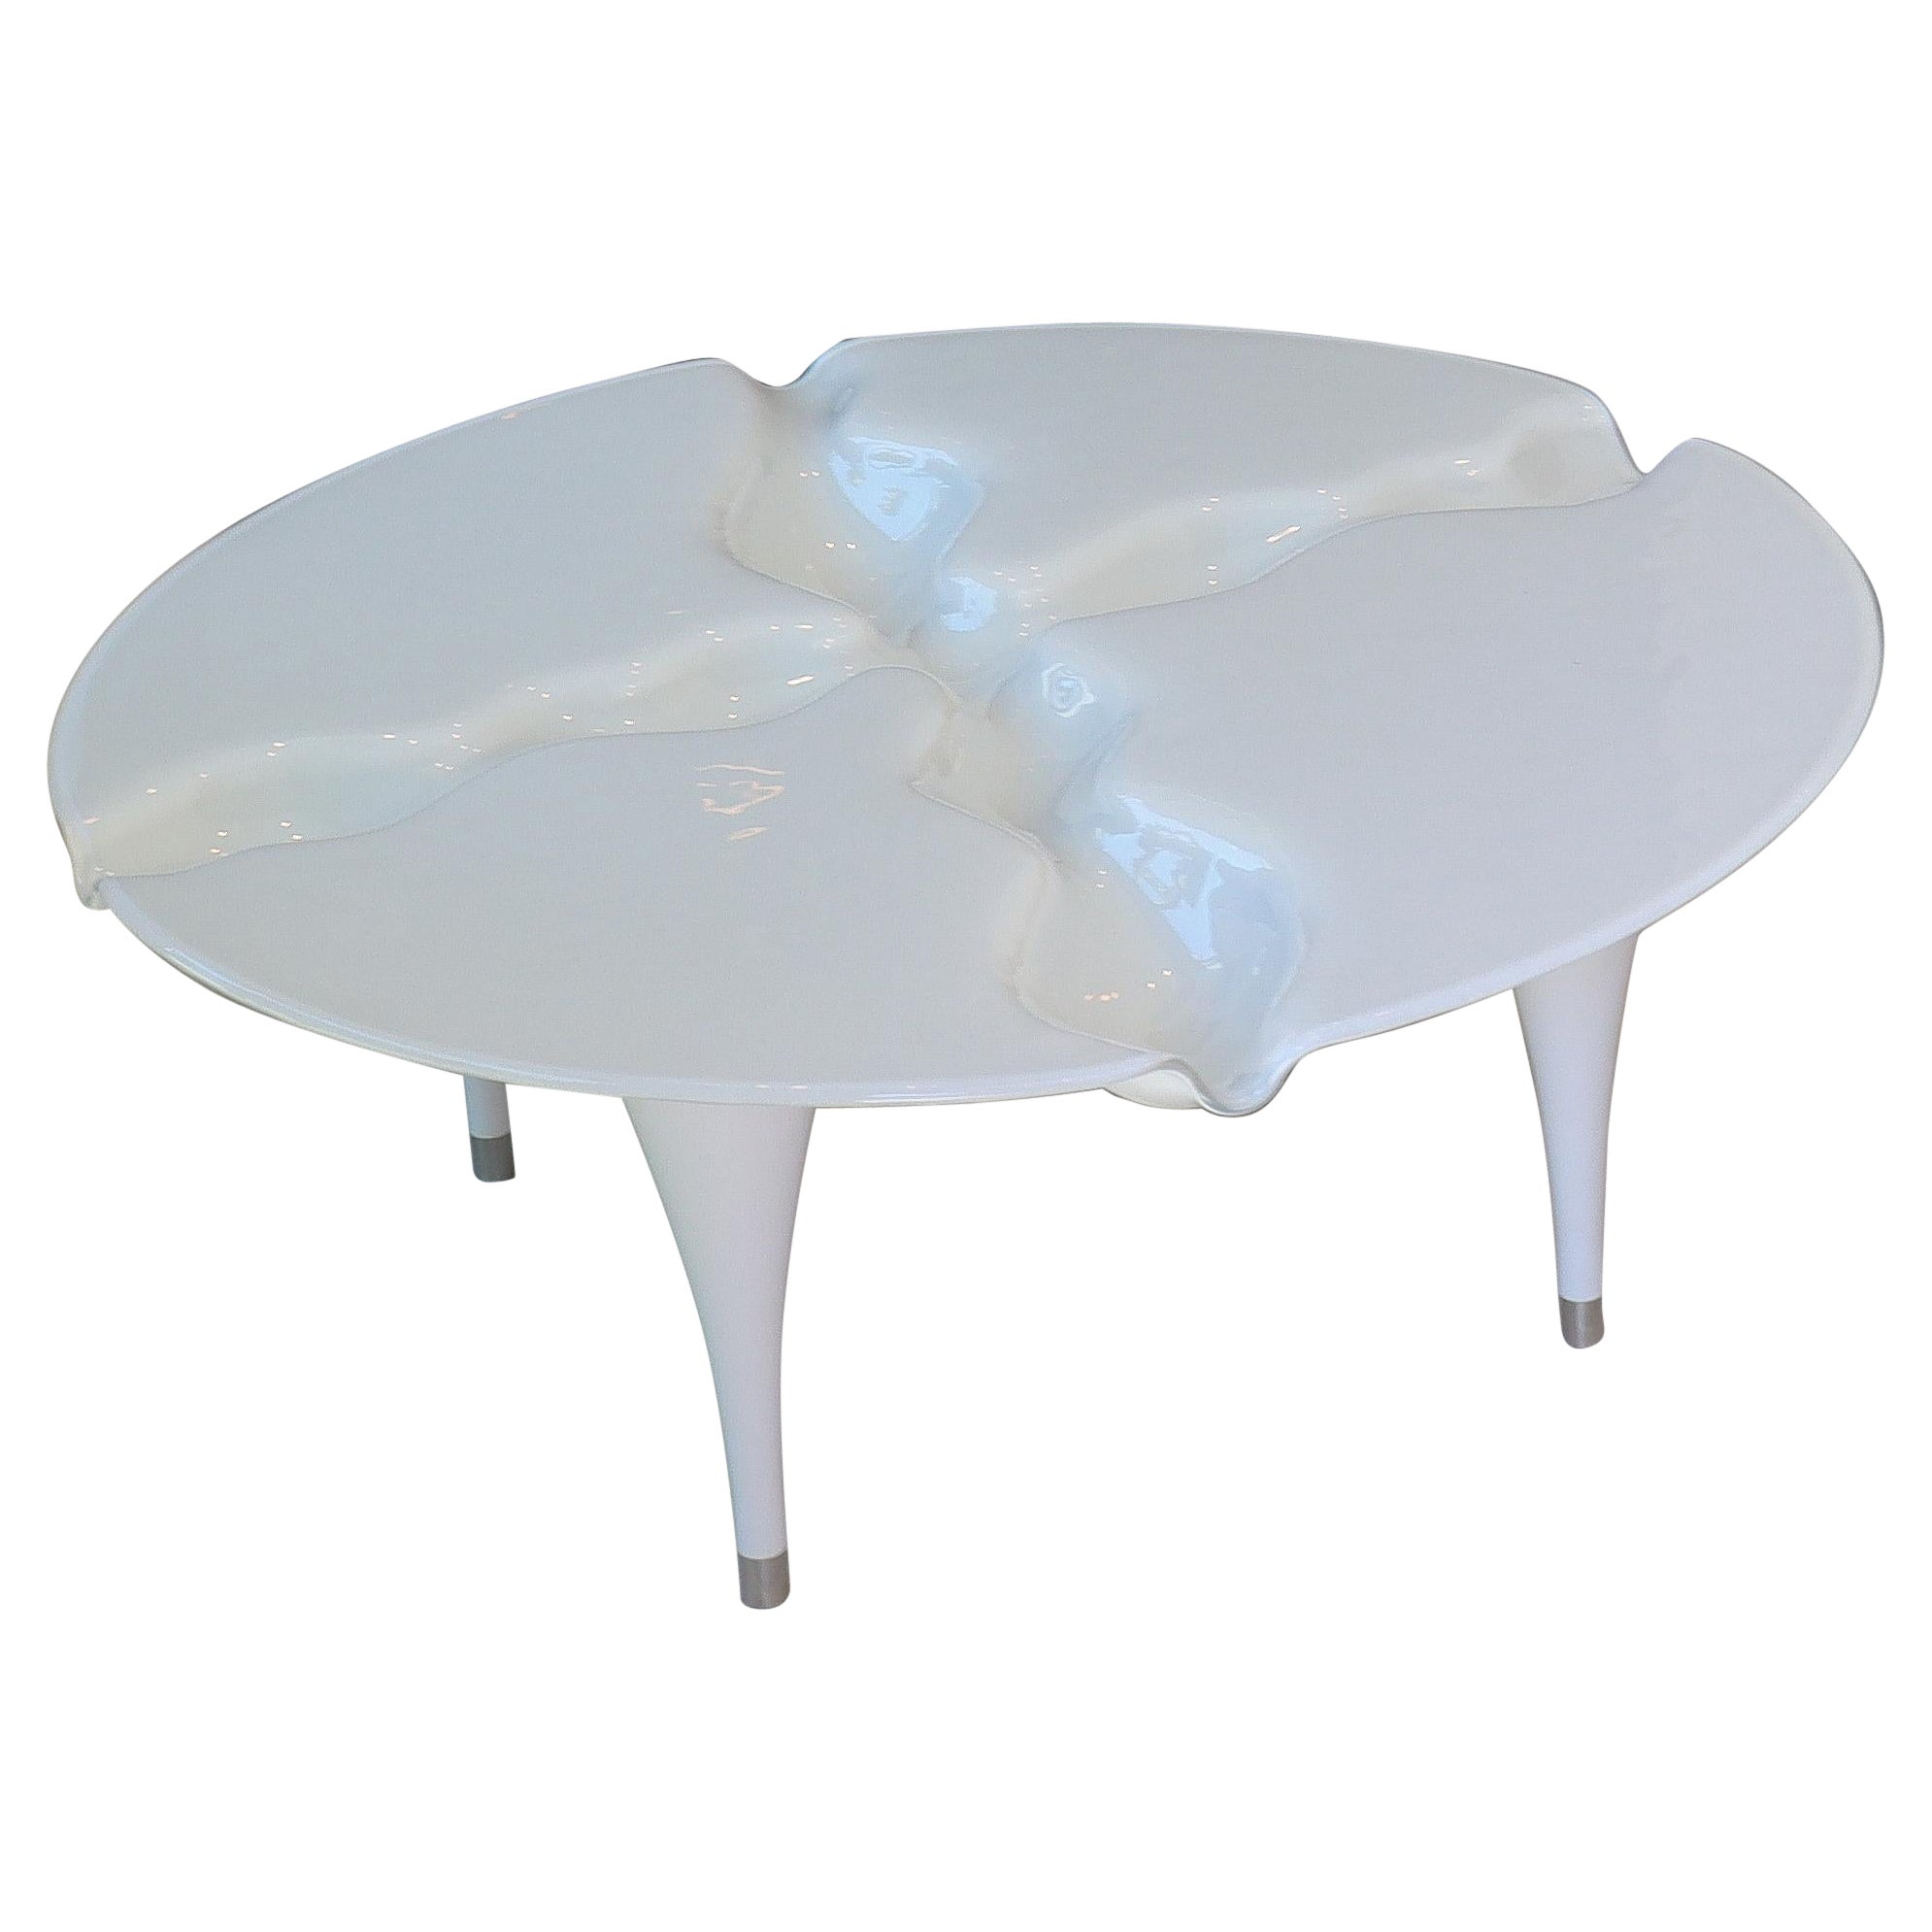 Plus Object Glass White Round Table